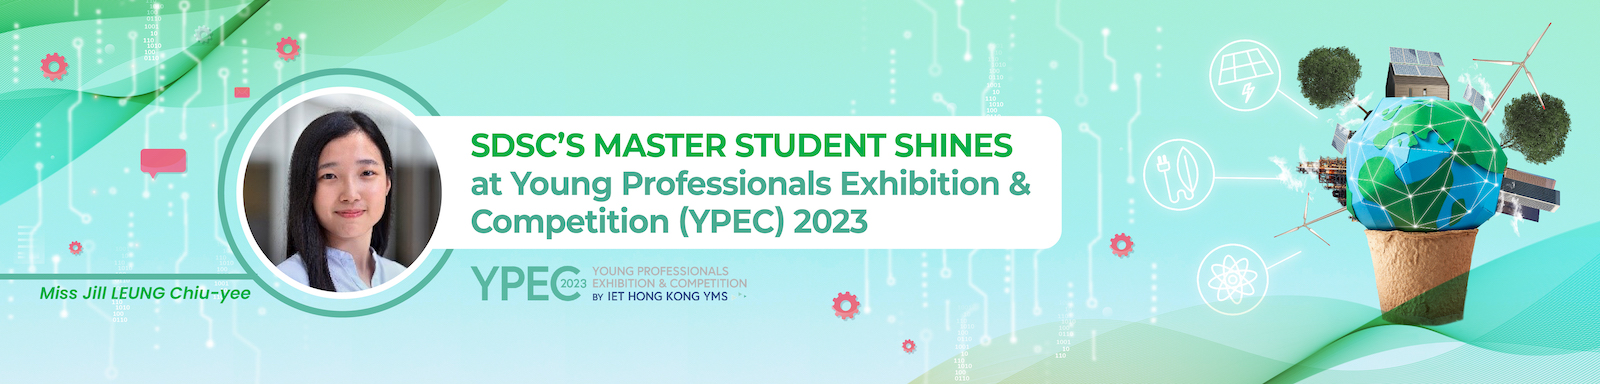 SDSC’s master student shines at Young Professionals Exhibition & Competition (YPEC) 2023